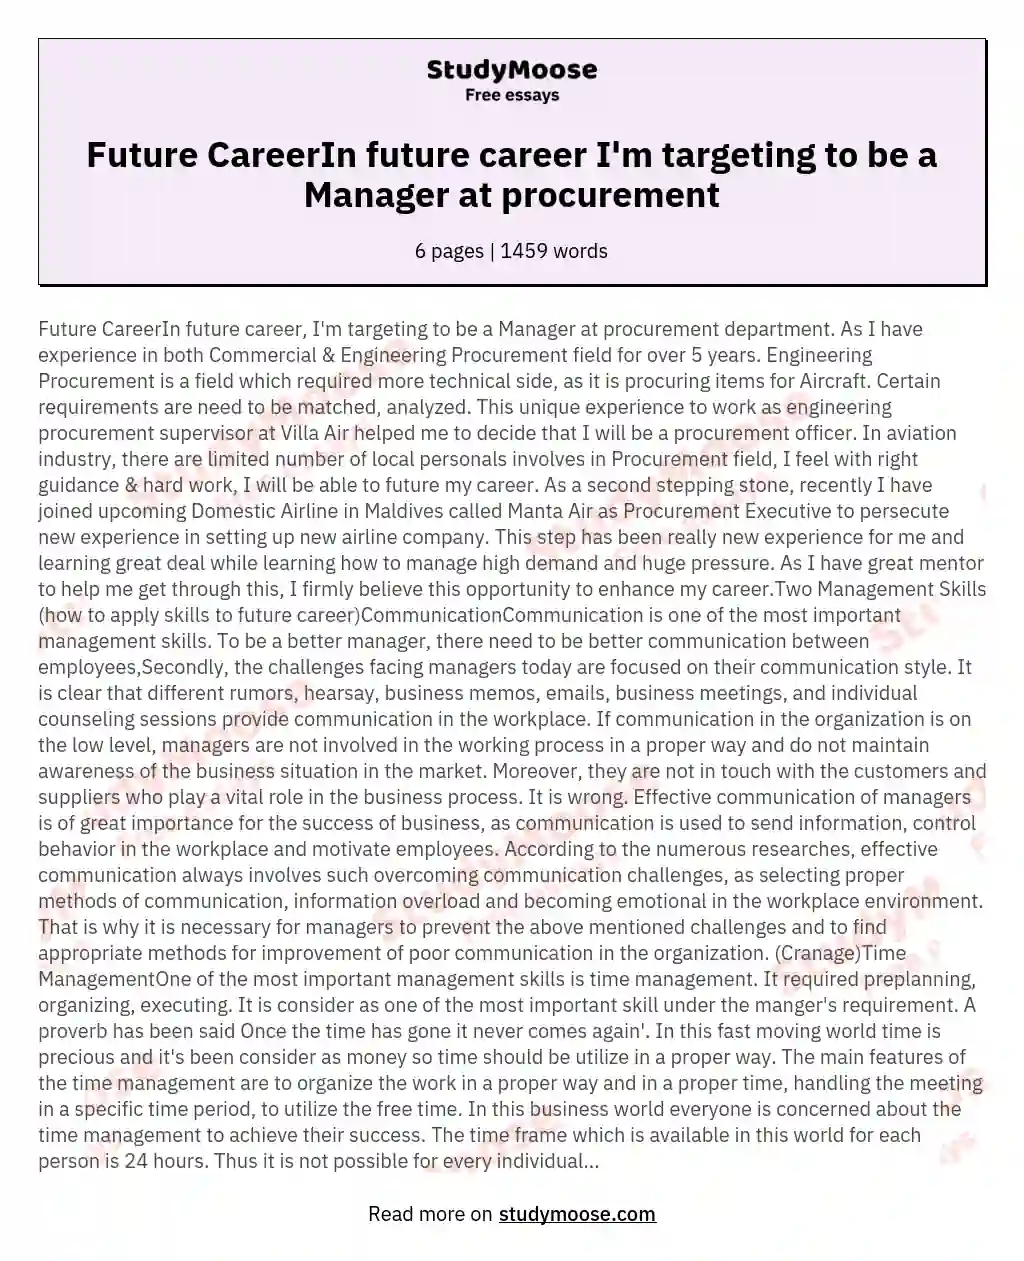 Future CareerIn future career I'm targeting to be a Manager at procurement essay